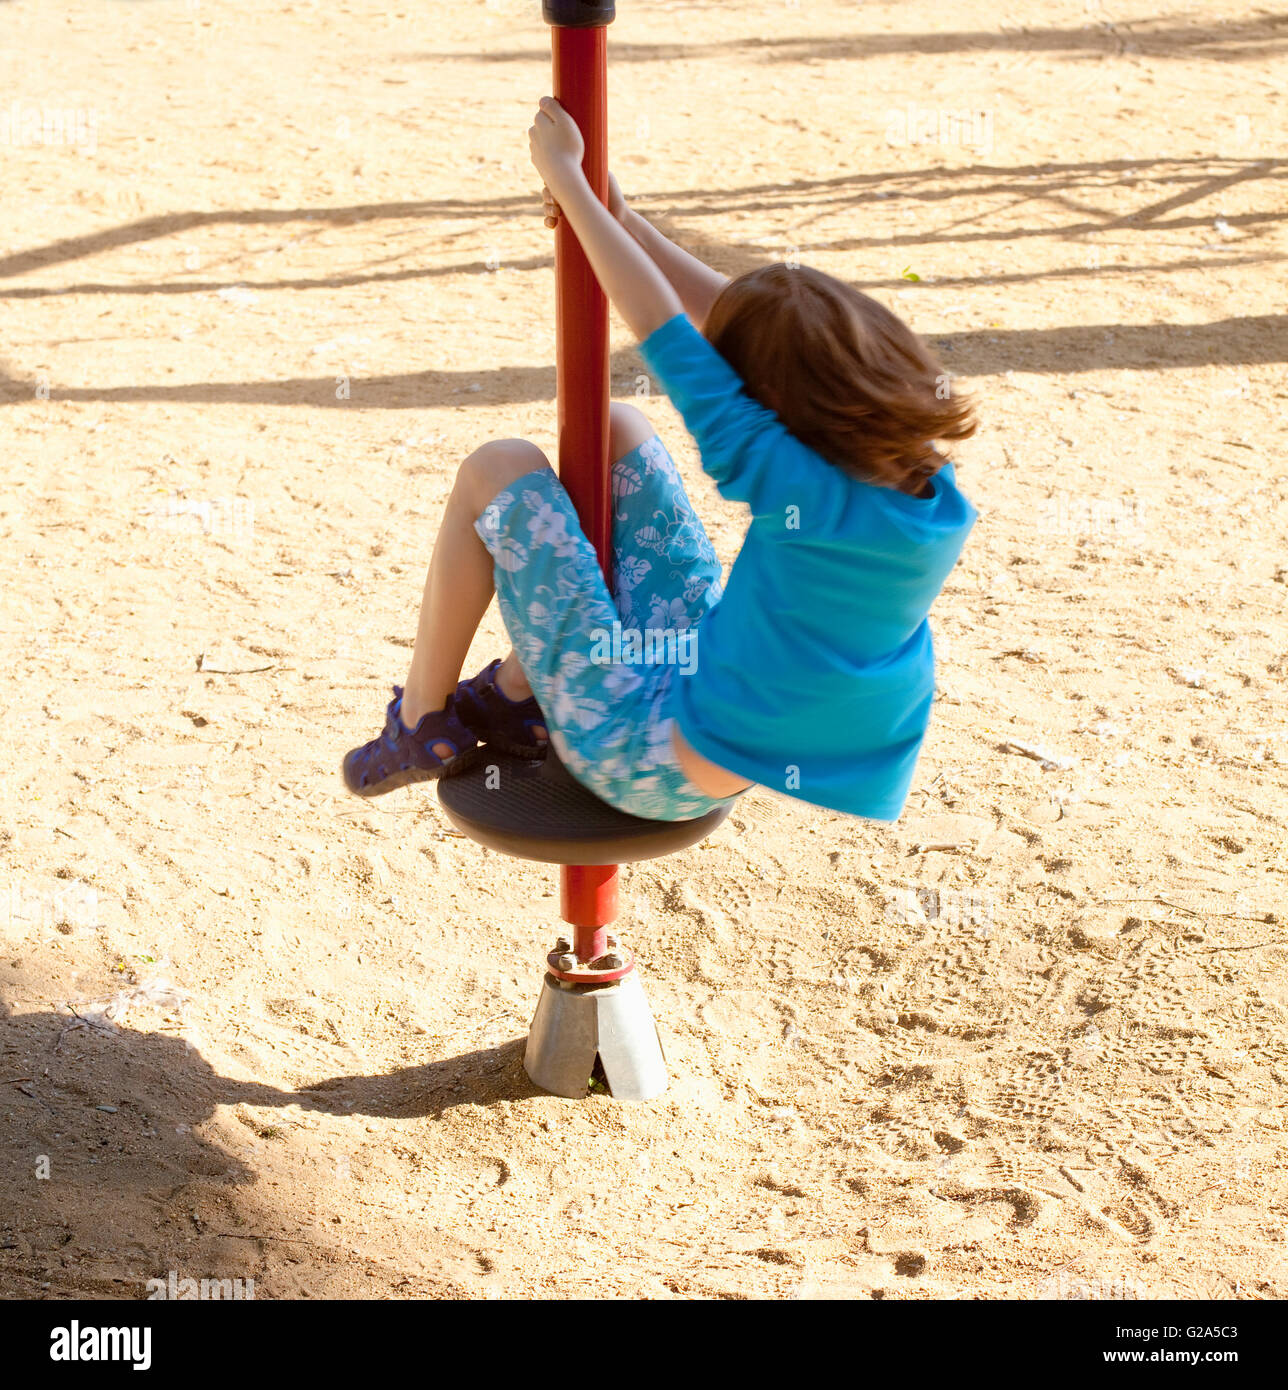 Boy with Blond Hair Spinning on a Pole at Playground Stock Photo - Alamy